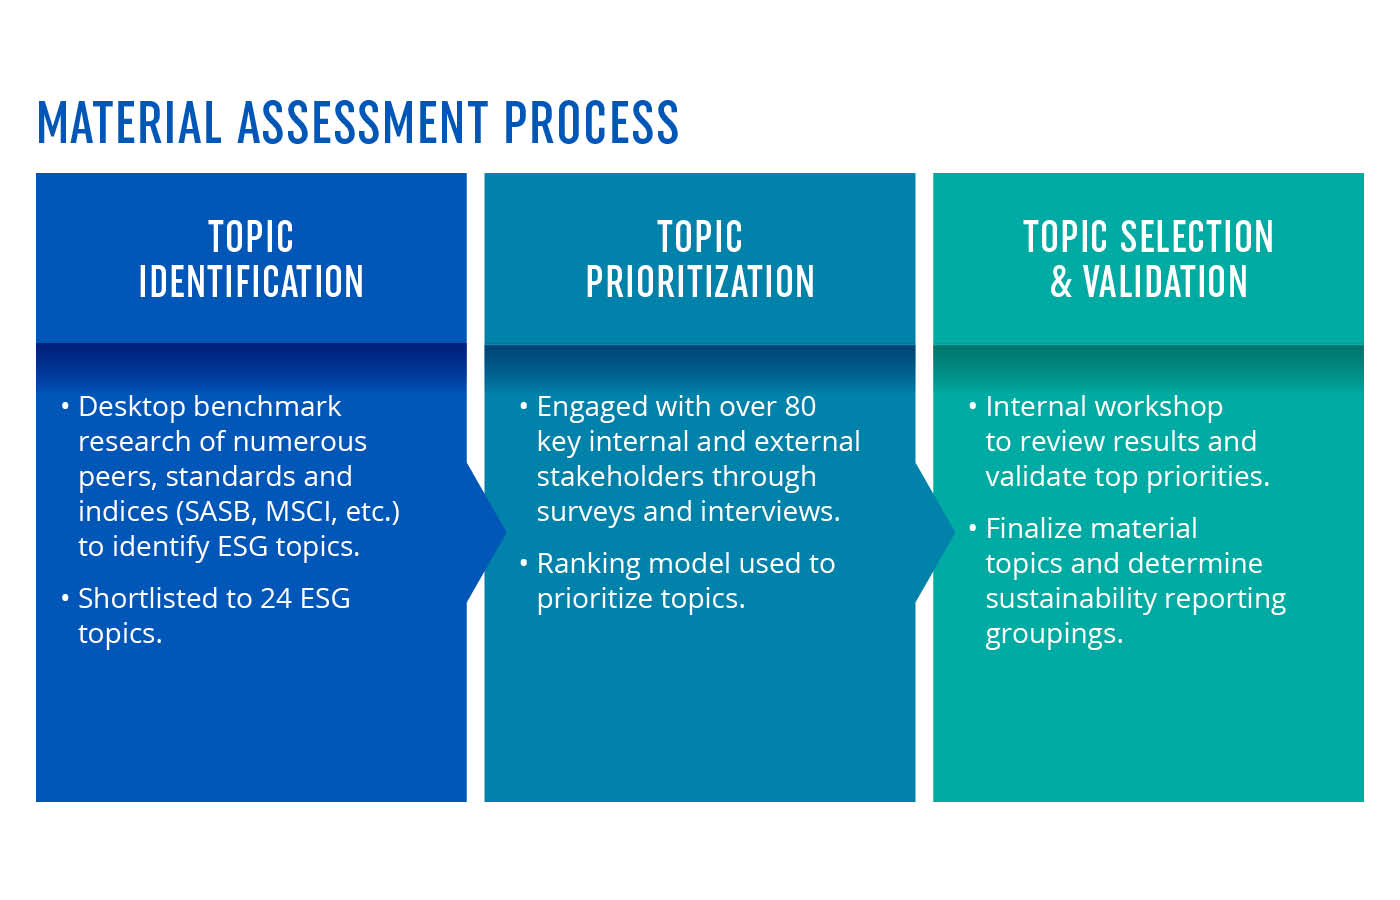 Materiality Assessment Process